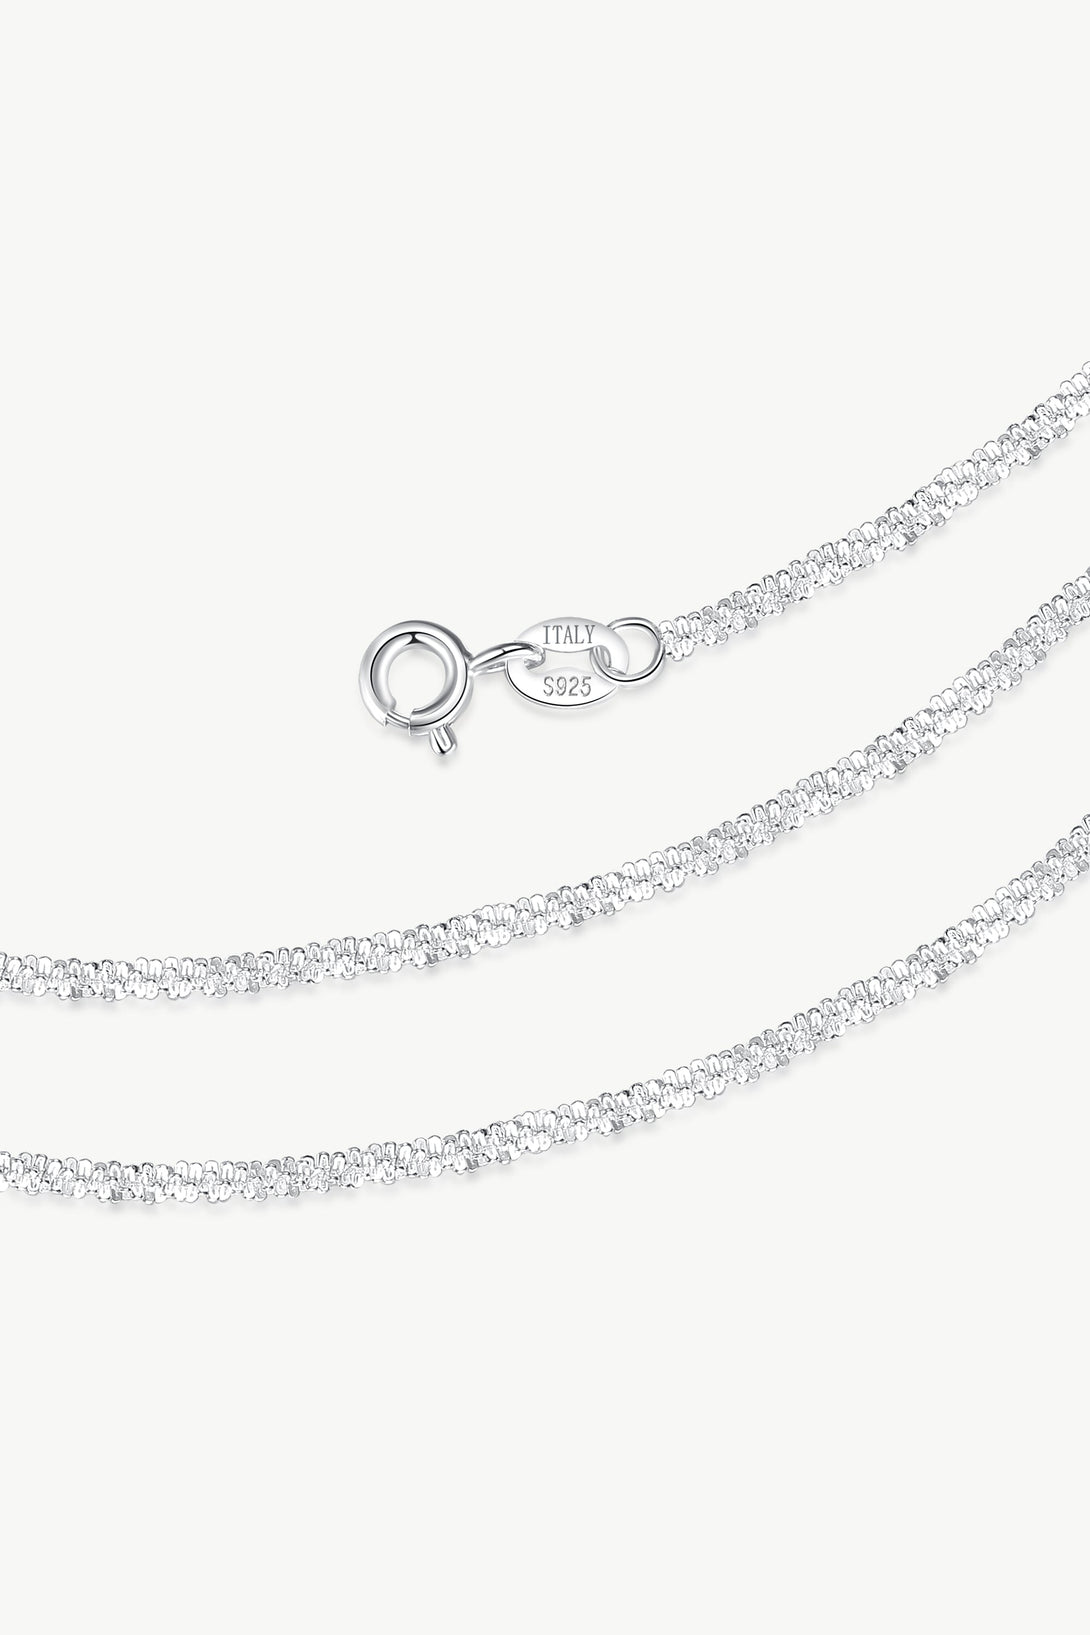 Italian 925 Sterling Silver Glistering Necklace - Classicharms